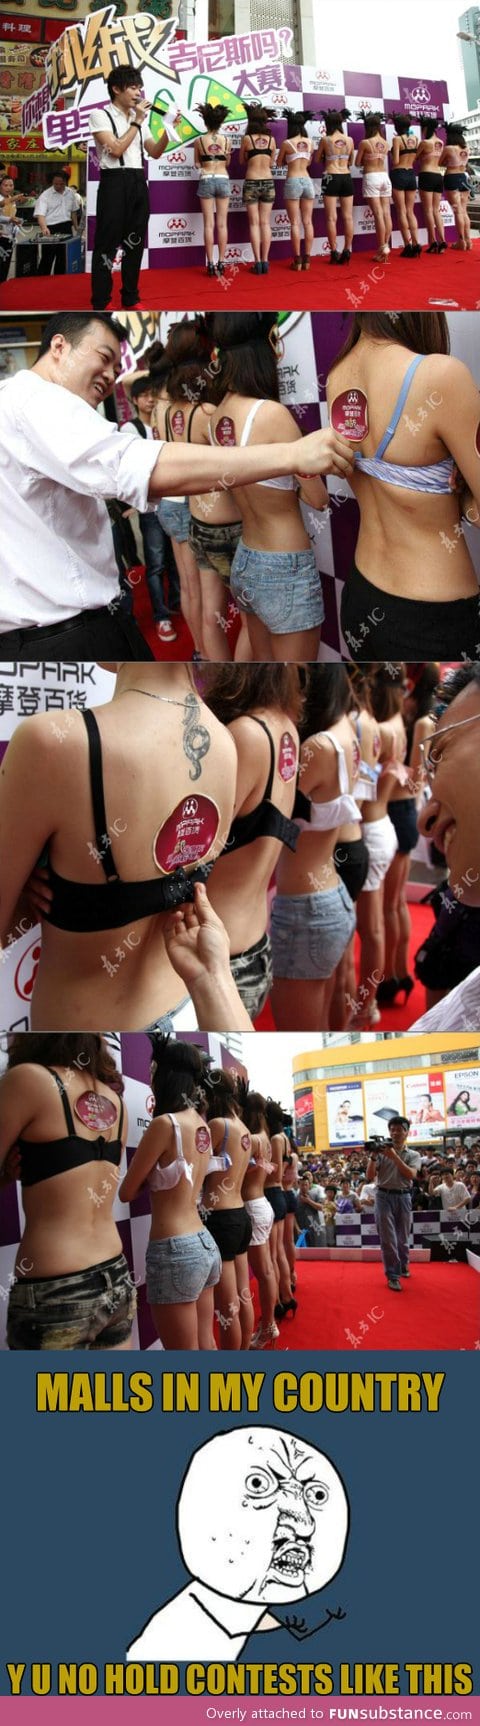 Guangzhou mall bra removal contest